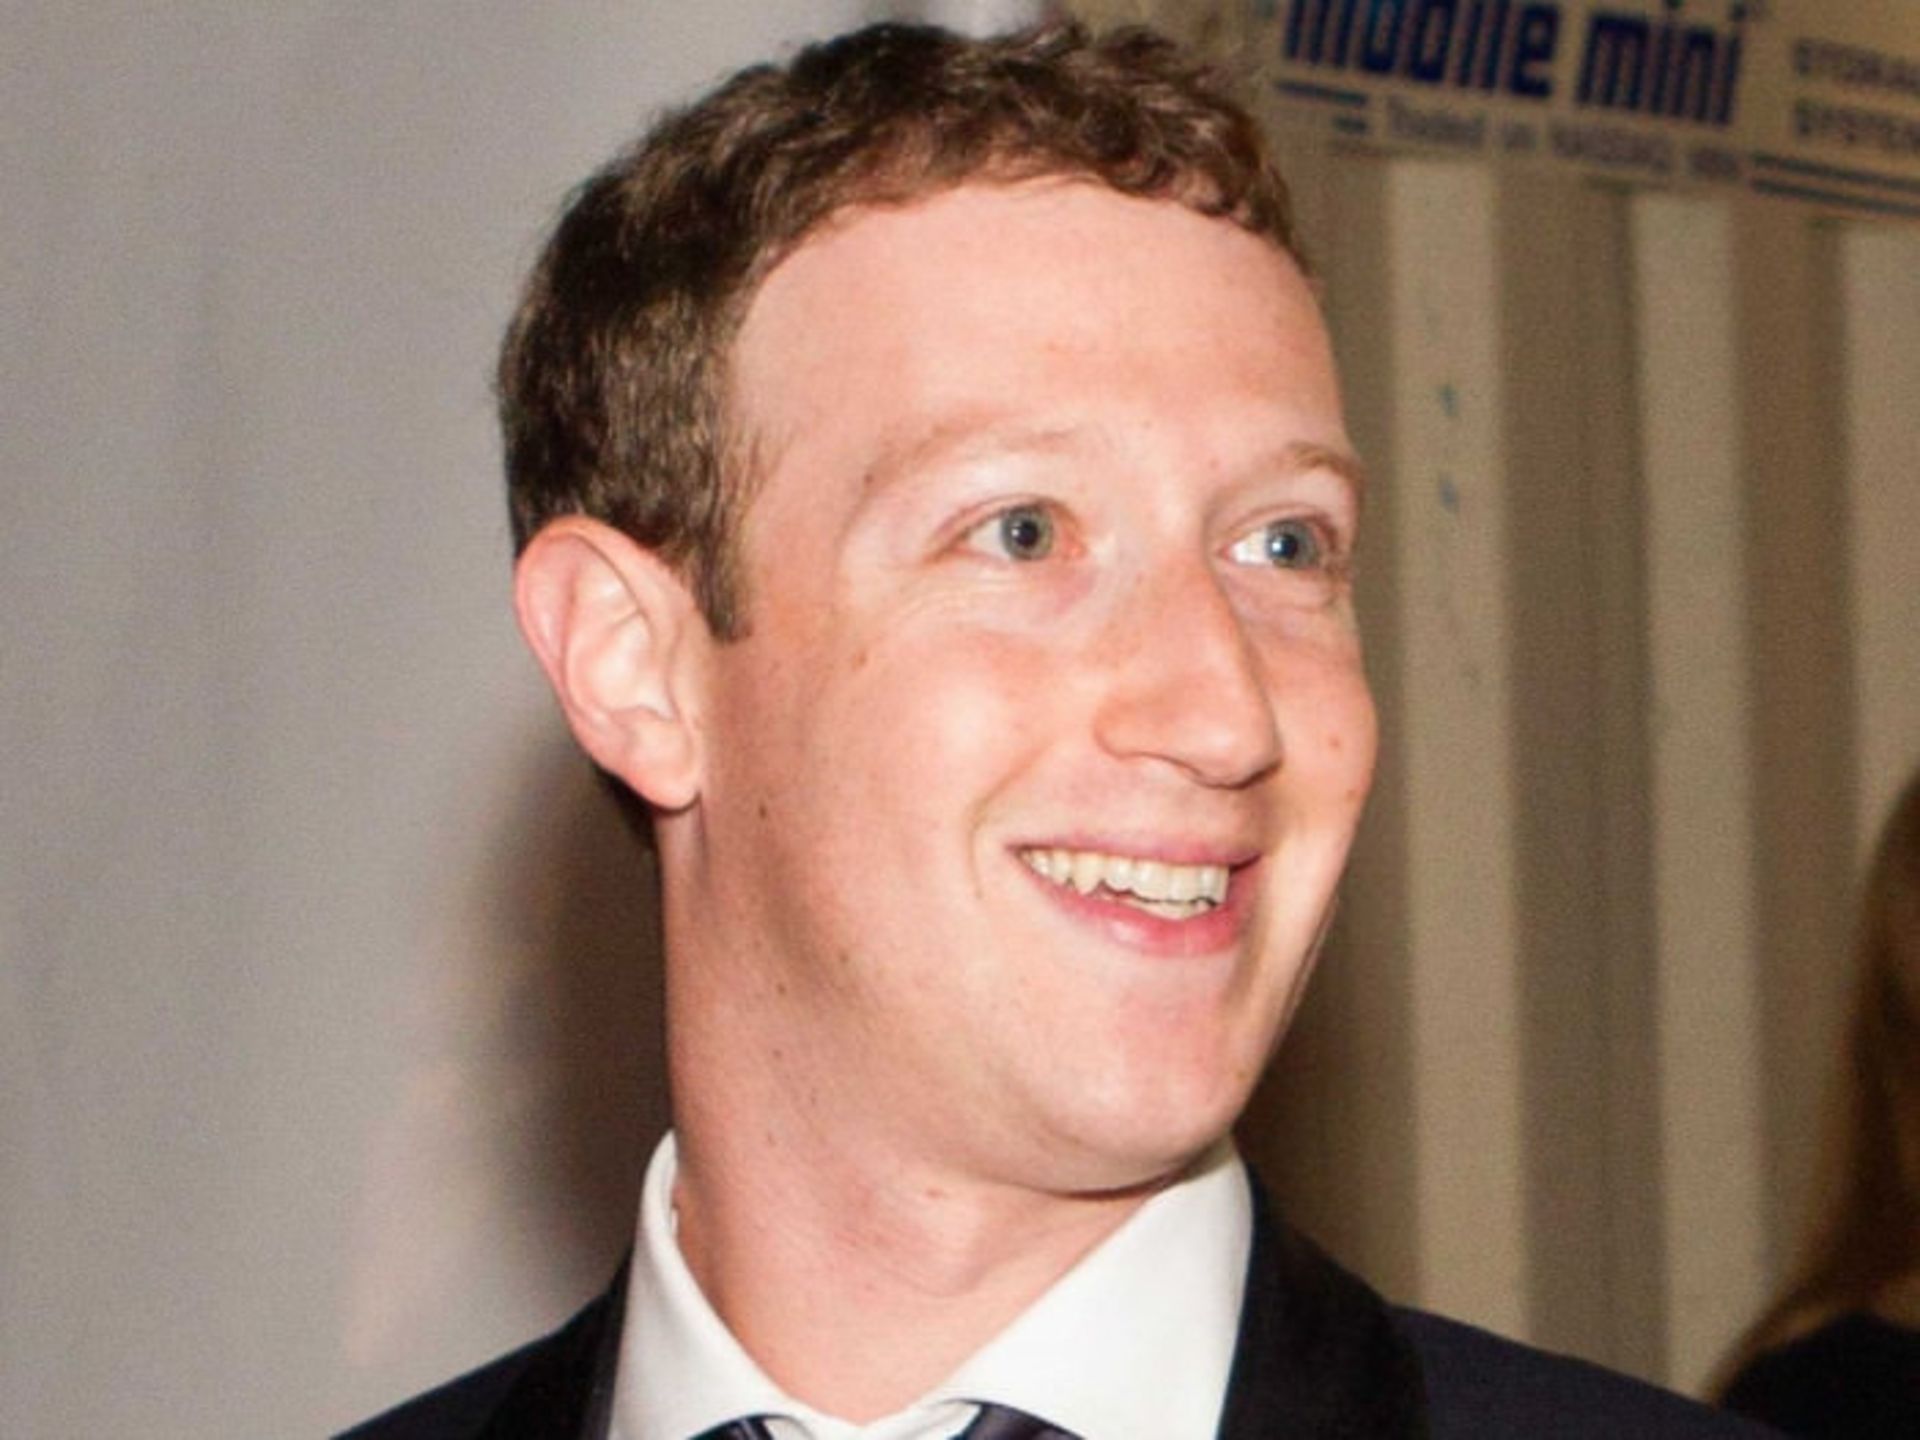 4-mark-zuckerberg-is-the-founder-and-ceo-of-facebook